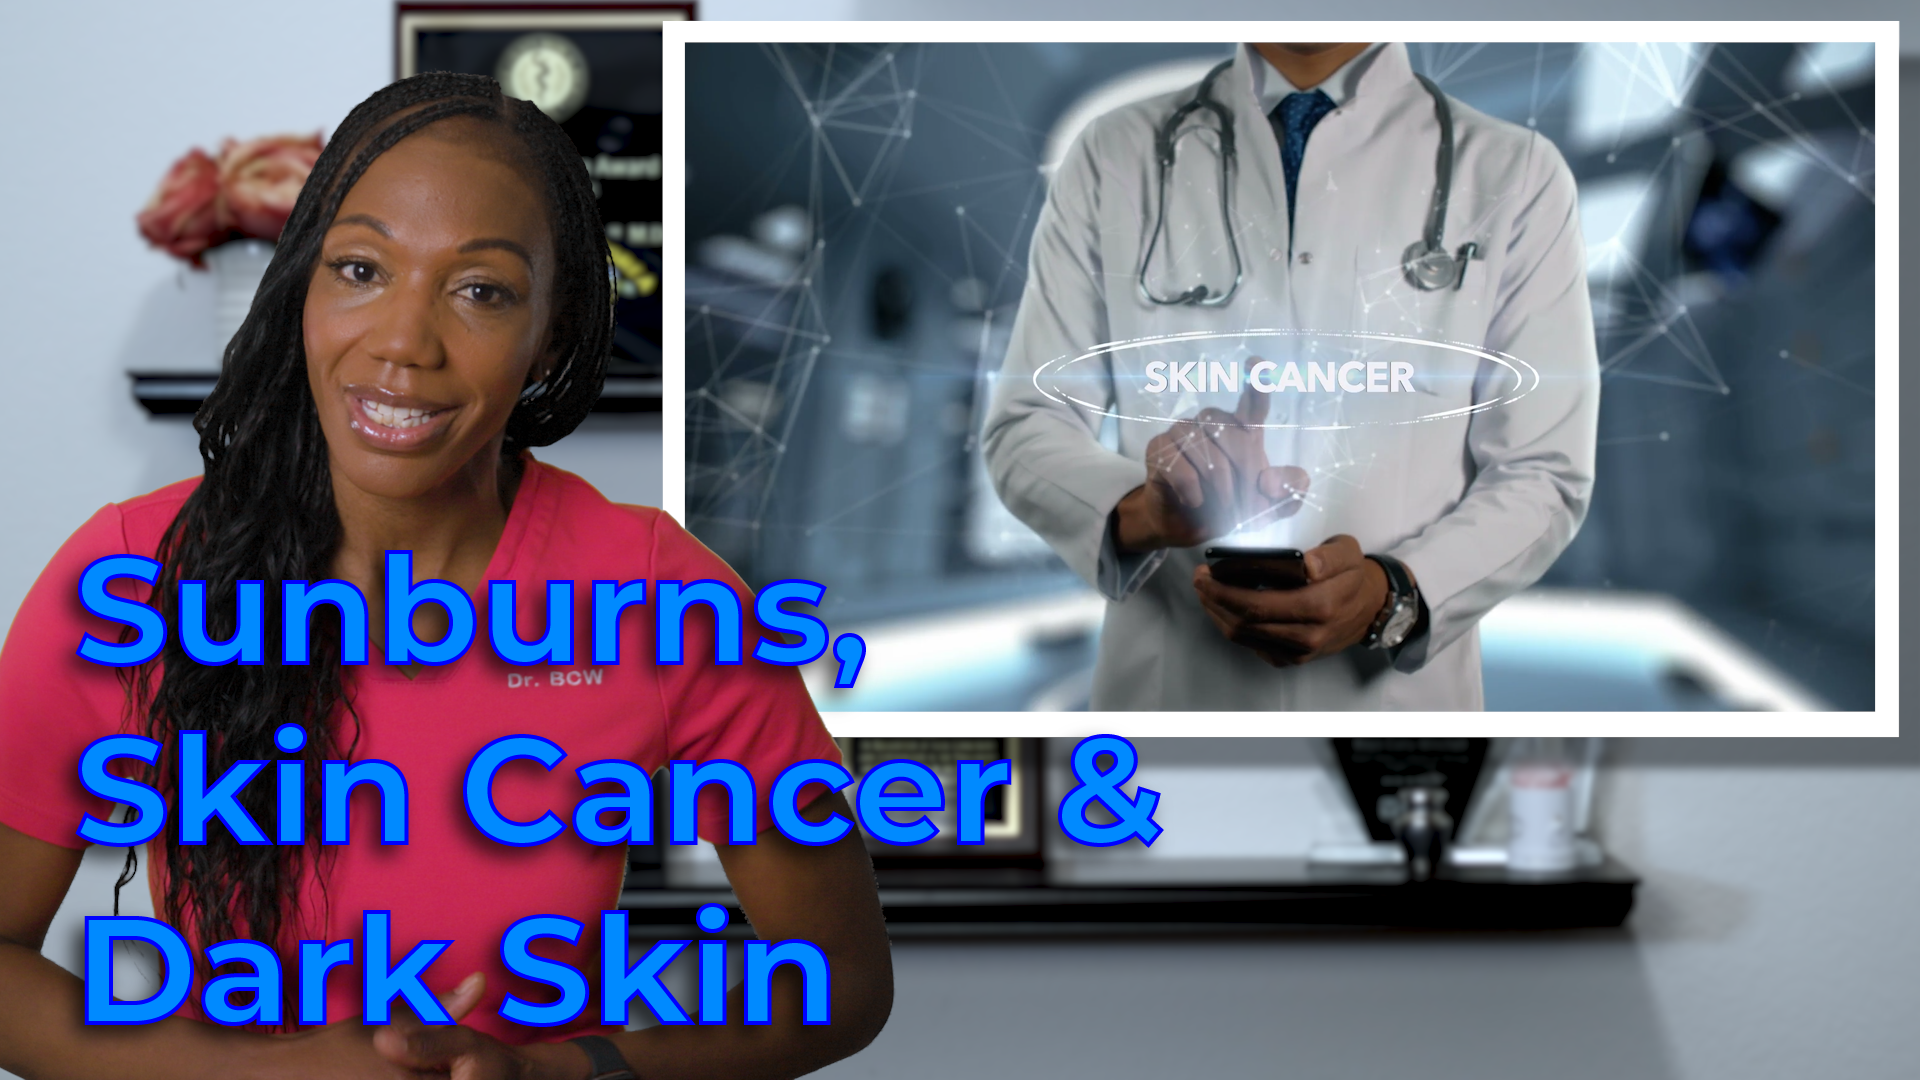 black people, sunburns and skin cancer, Dr. BCW, Dr. Curry-Winchell